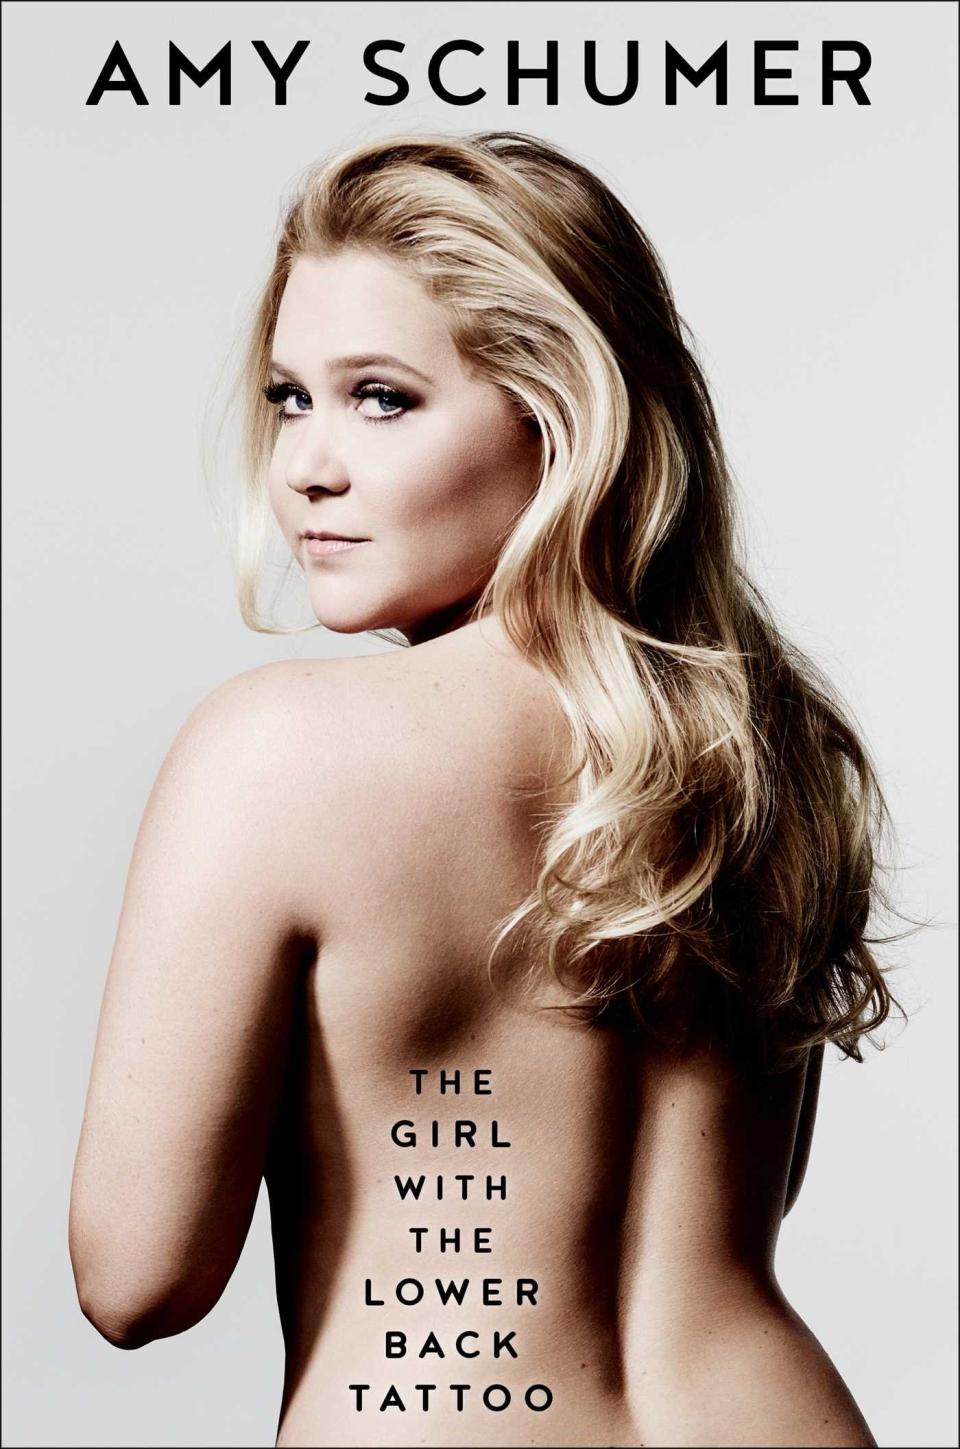 "The Girl With the Lower Back Tattoo" by Amy Schumer